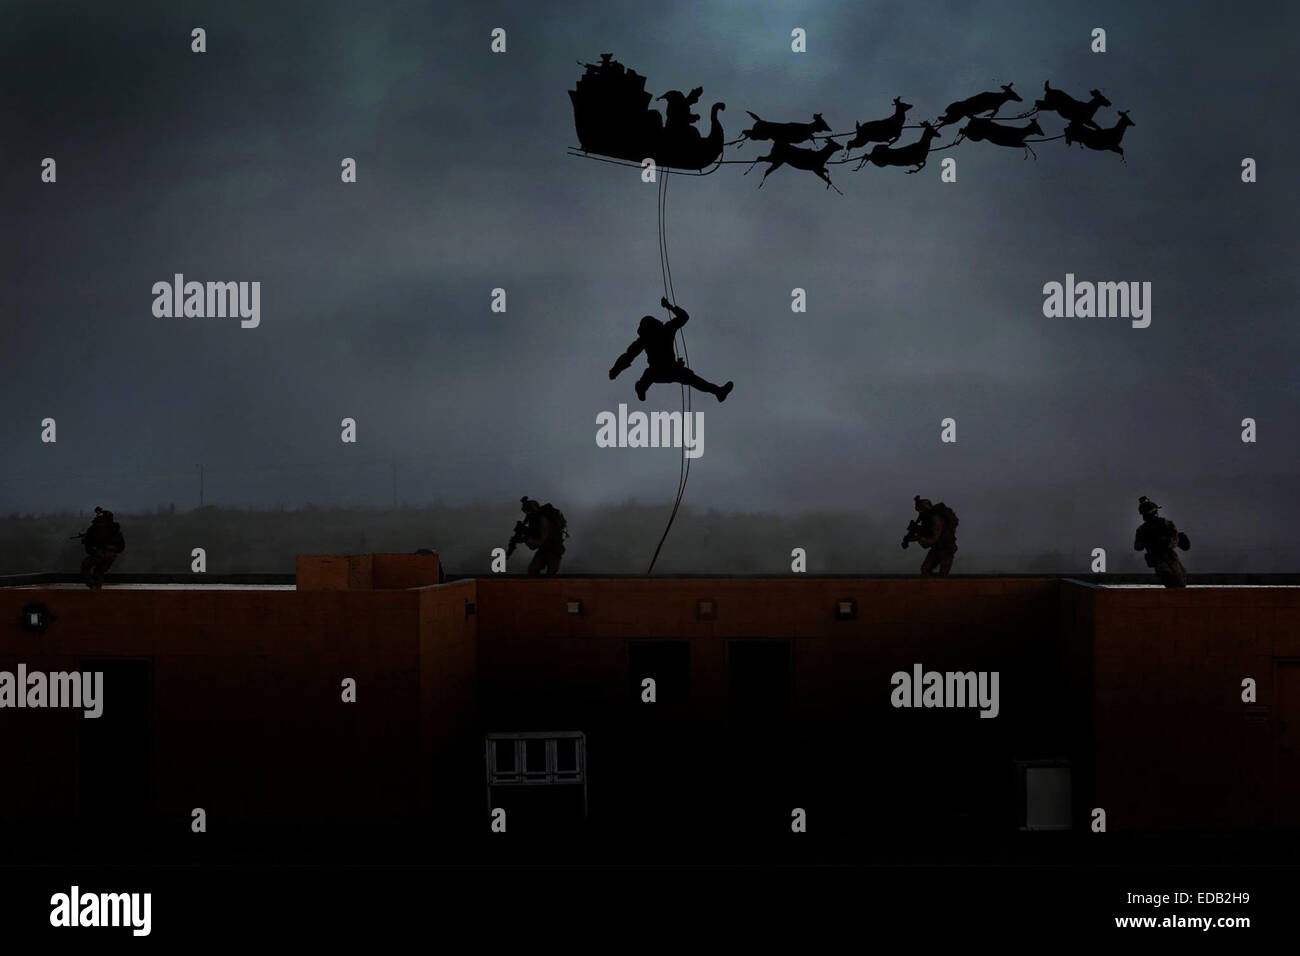 US Marines reconnaissance commandos repel down from Santa's sleigh during Christmas in a photo illustration December 24, 2014. Stock Photo